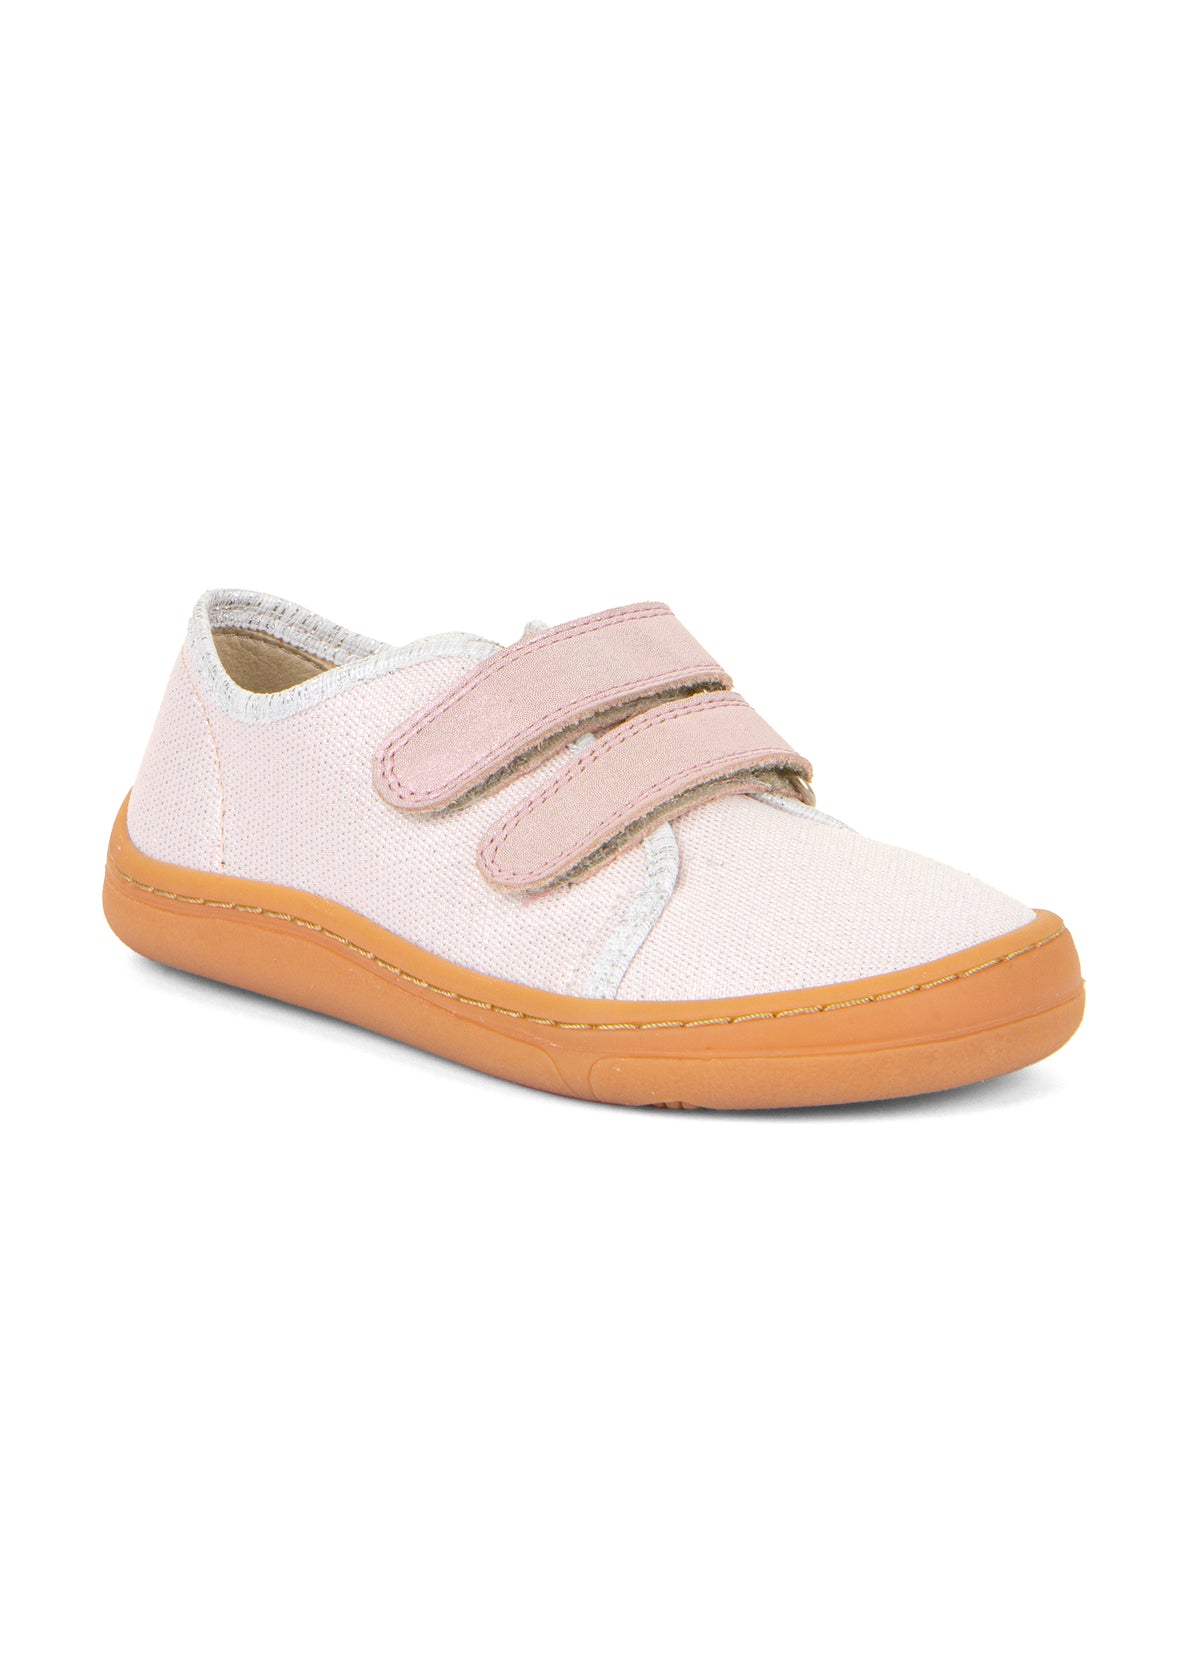 Children's barefoot sneakers - sparkly pink